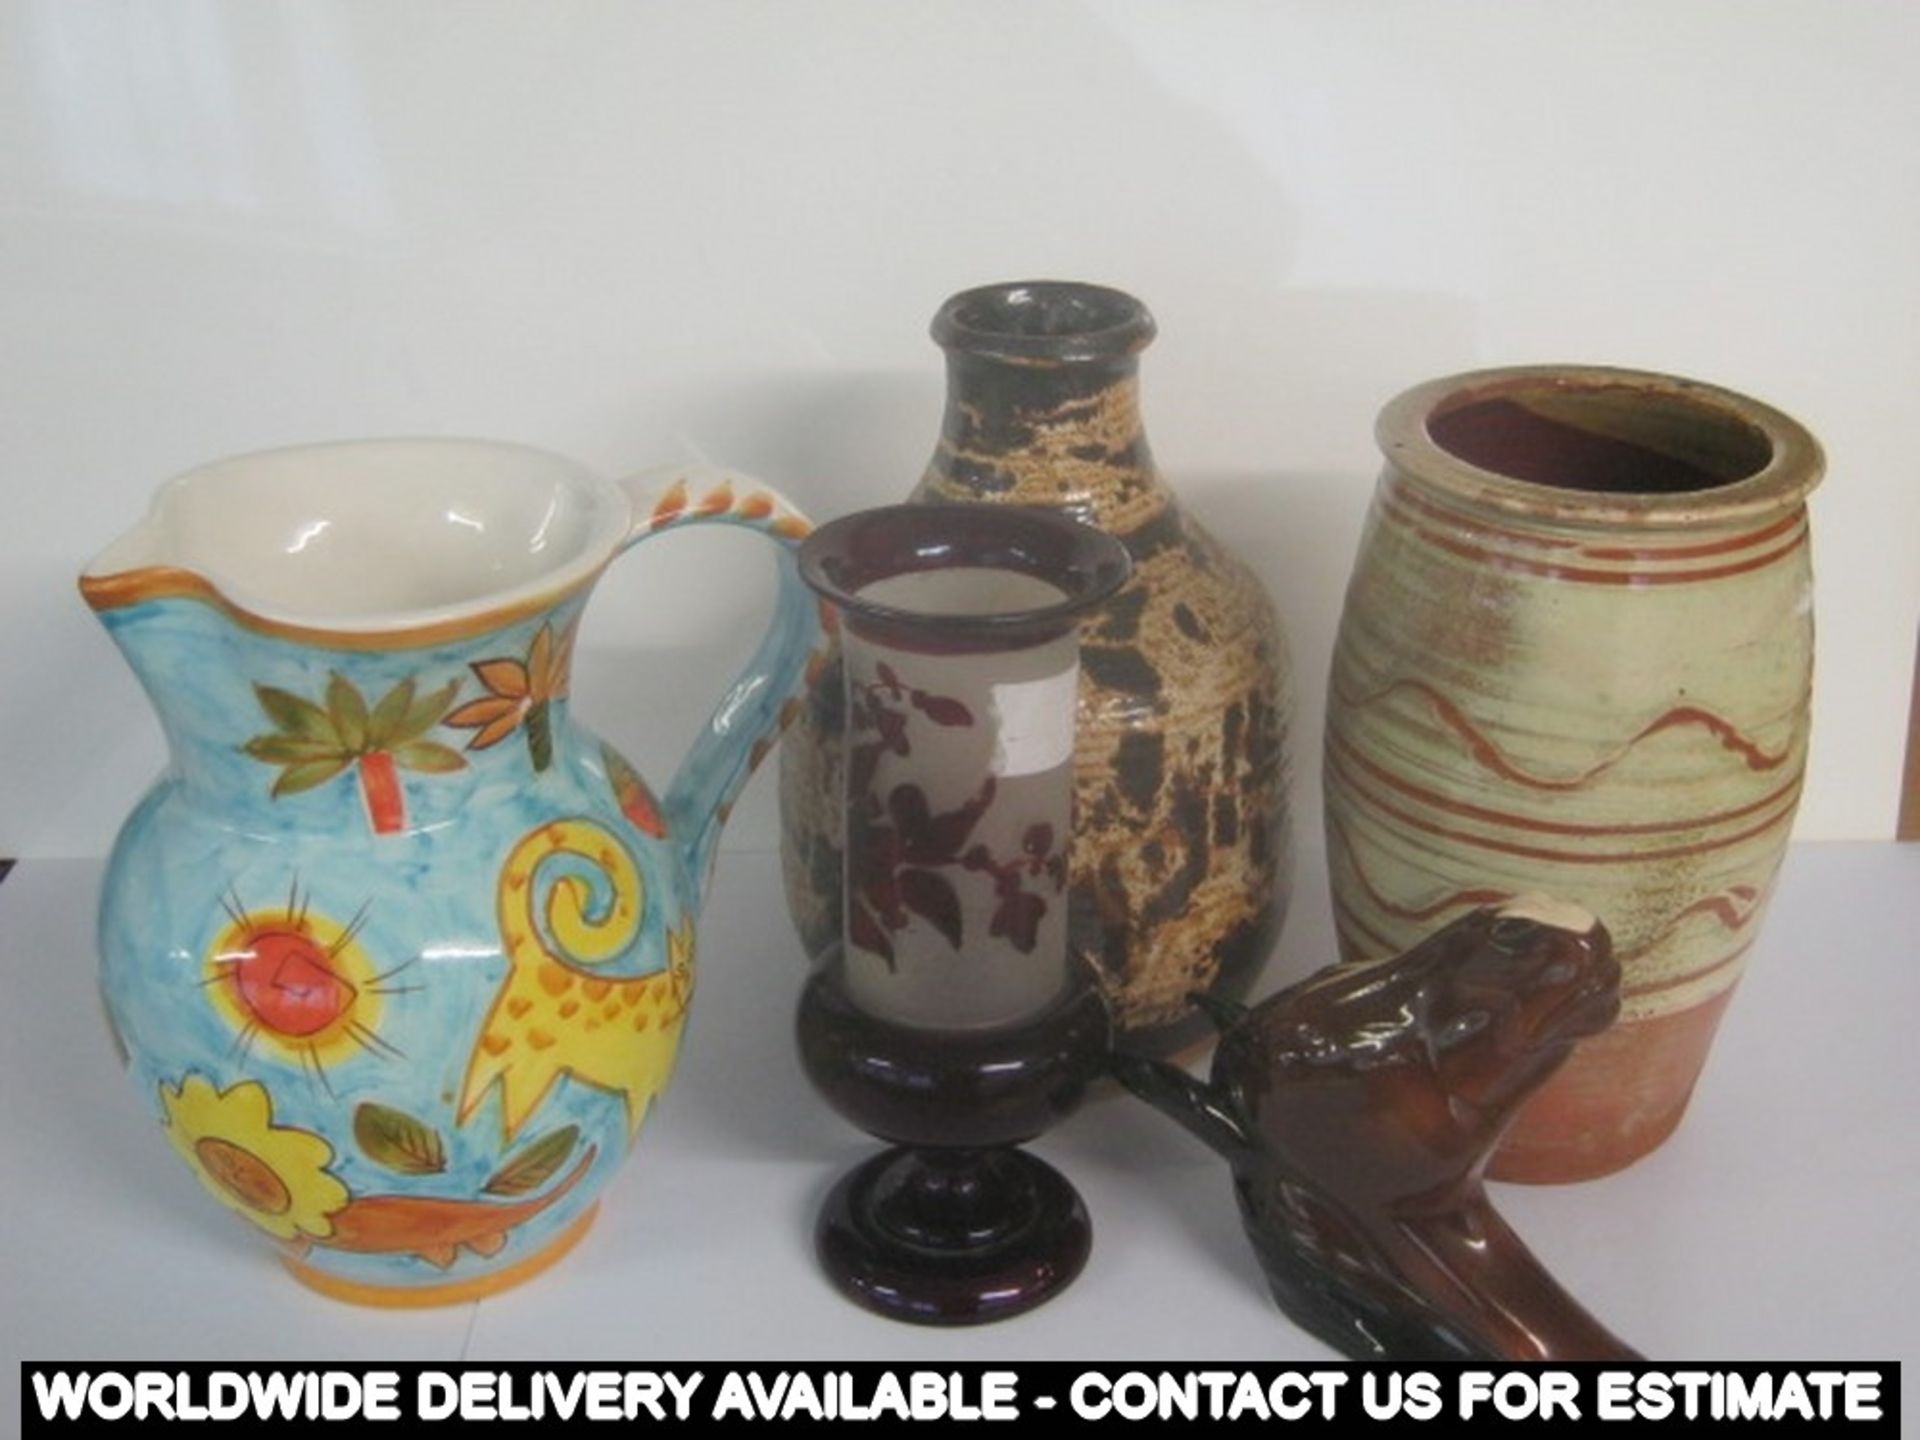 Five items of ceramics and glass